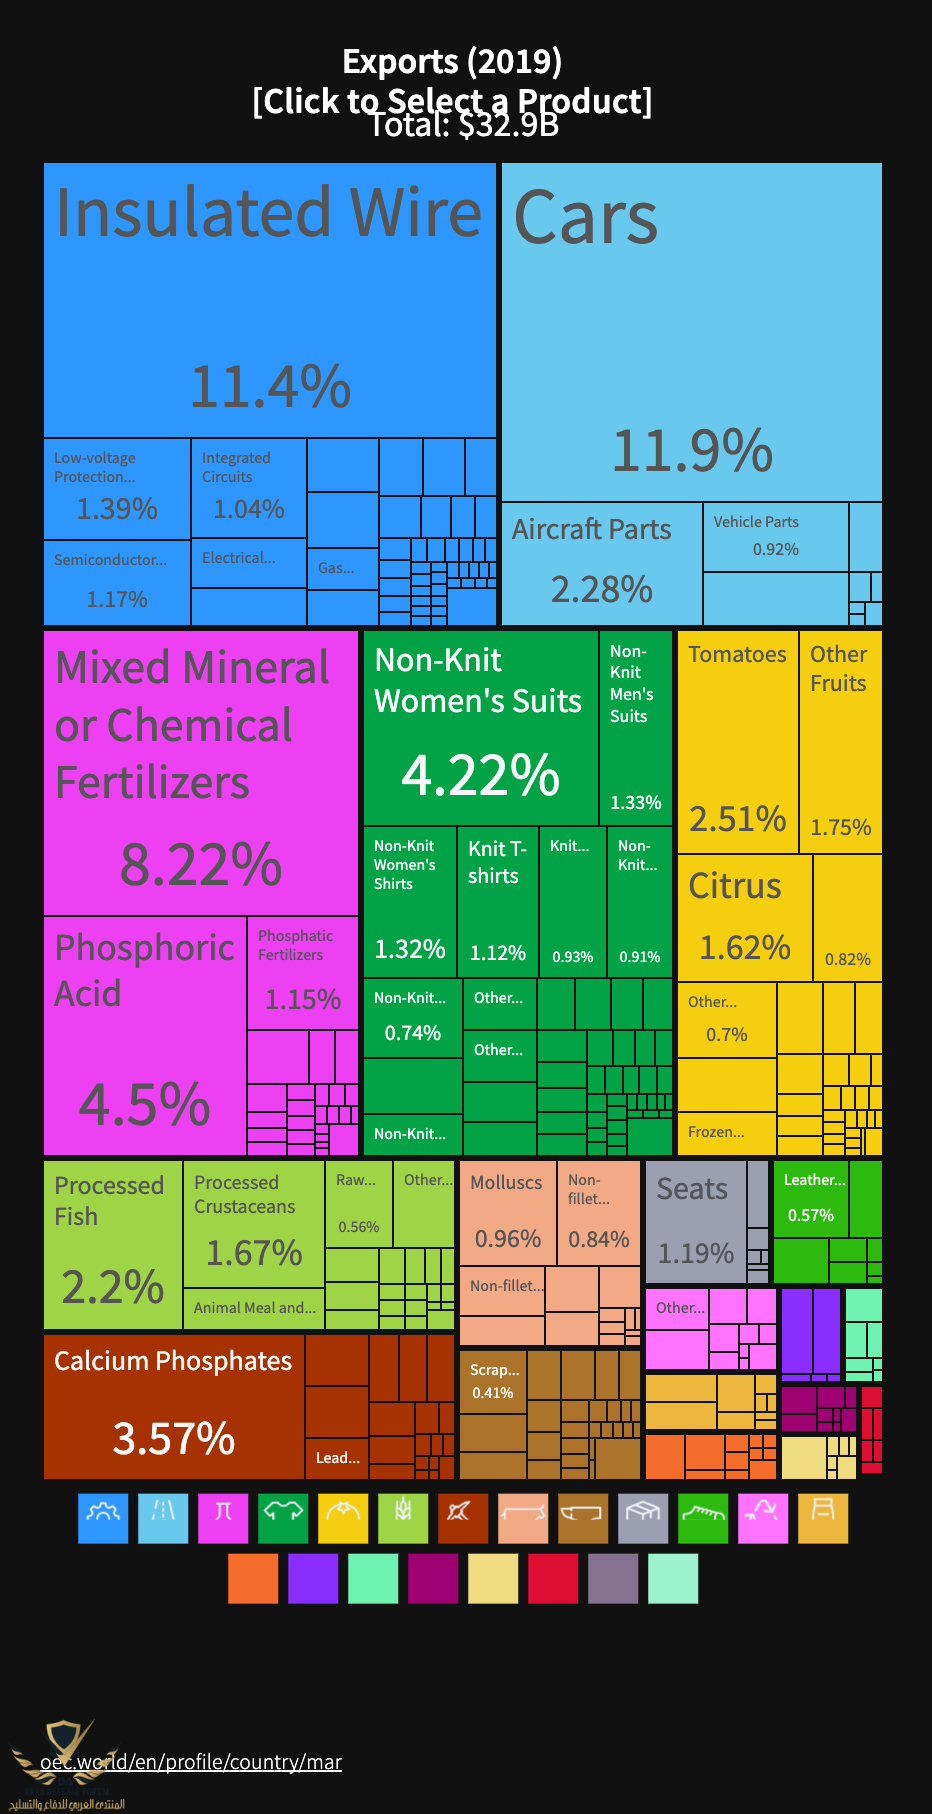 Exports-2019---Click-to-Select-a-Product.png